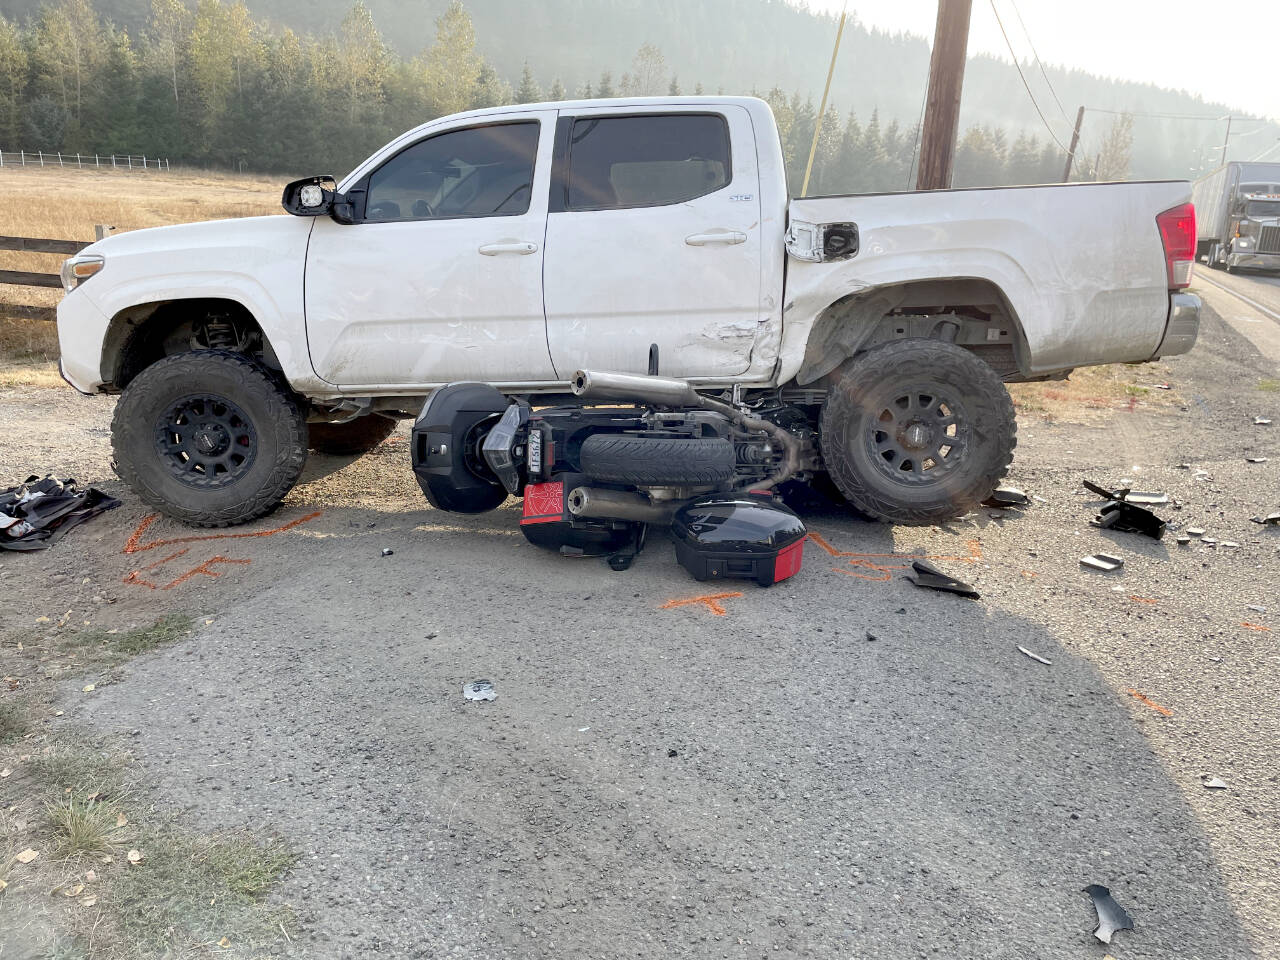 A Yamaha motorcycle and a Toyota Tacoma truck were involved in a collision Friday on state Highway 19. (Paula Hunt/Peninsula Daily News)